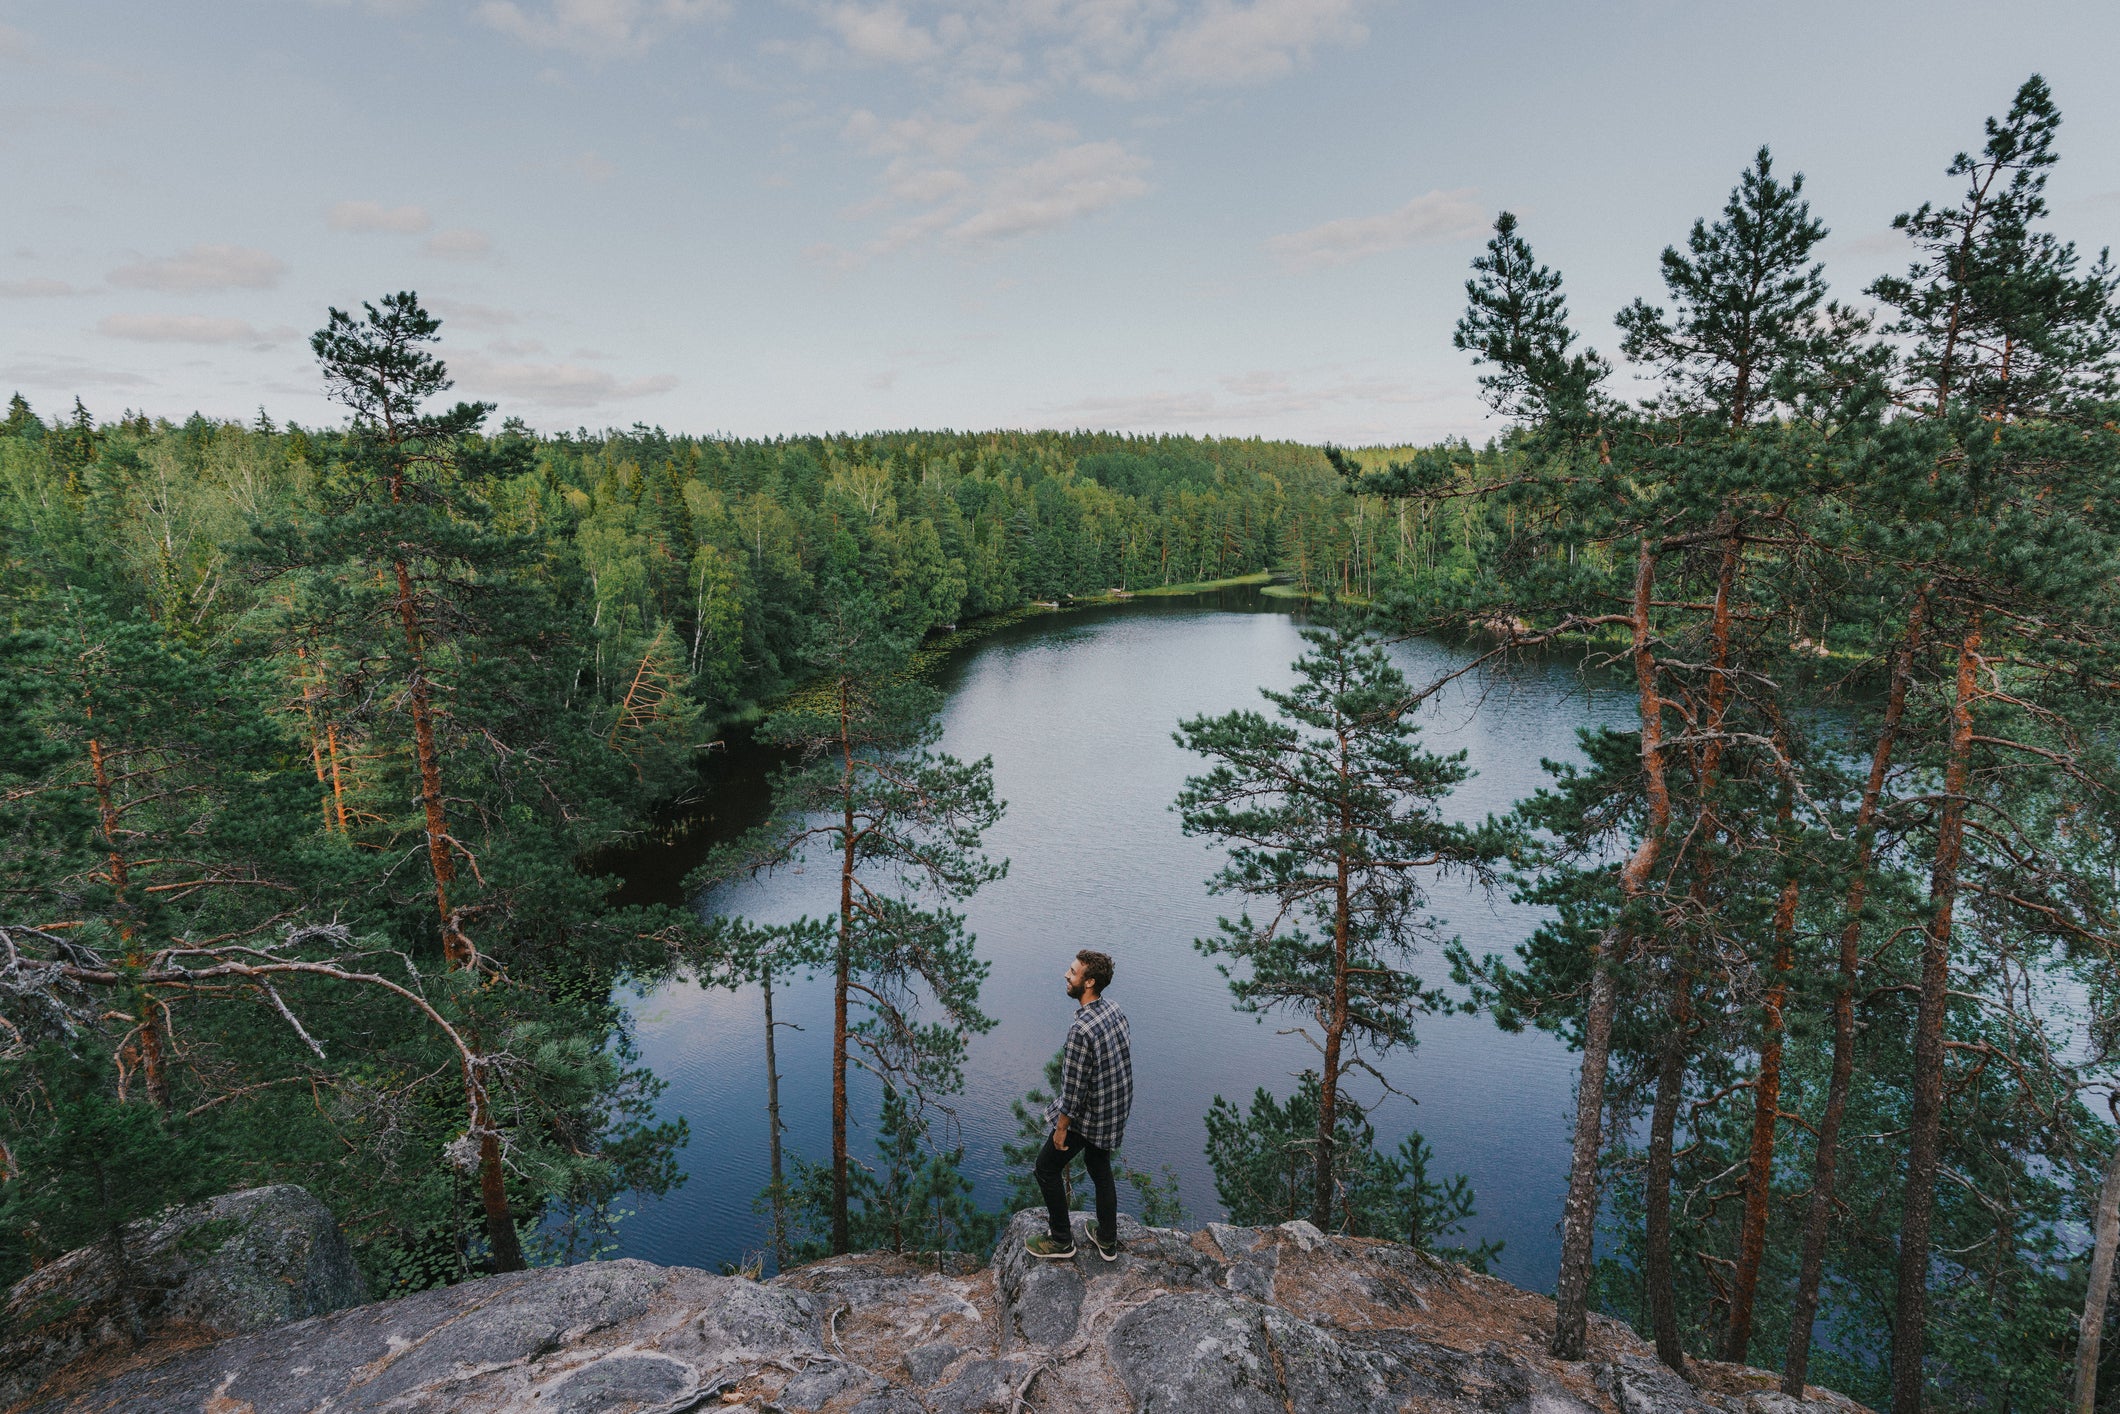 Connecting with nature is integral to Finnish culture